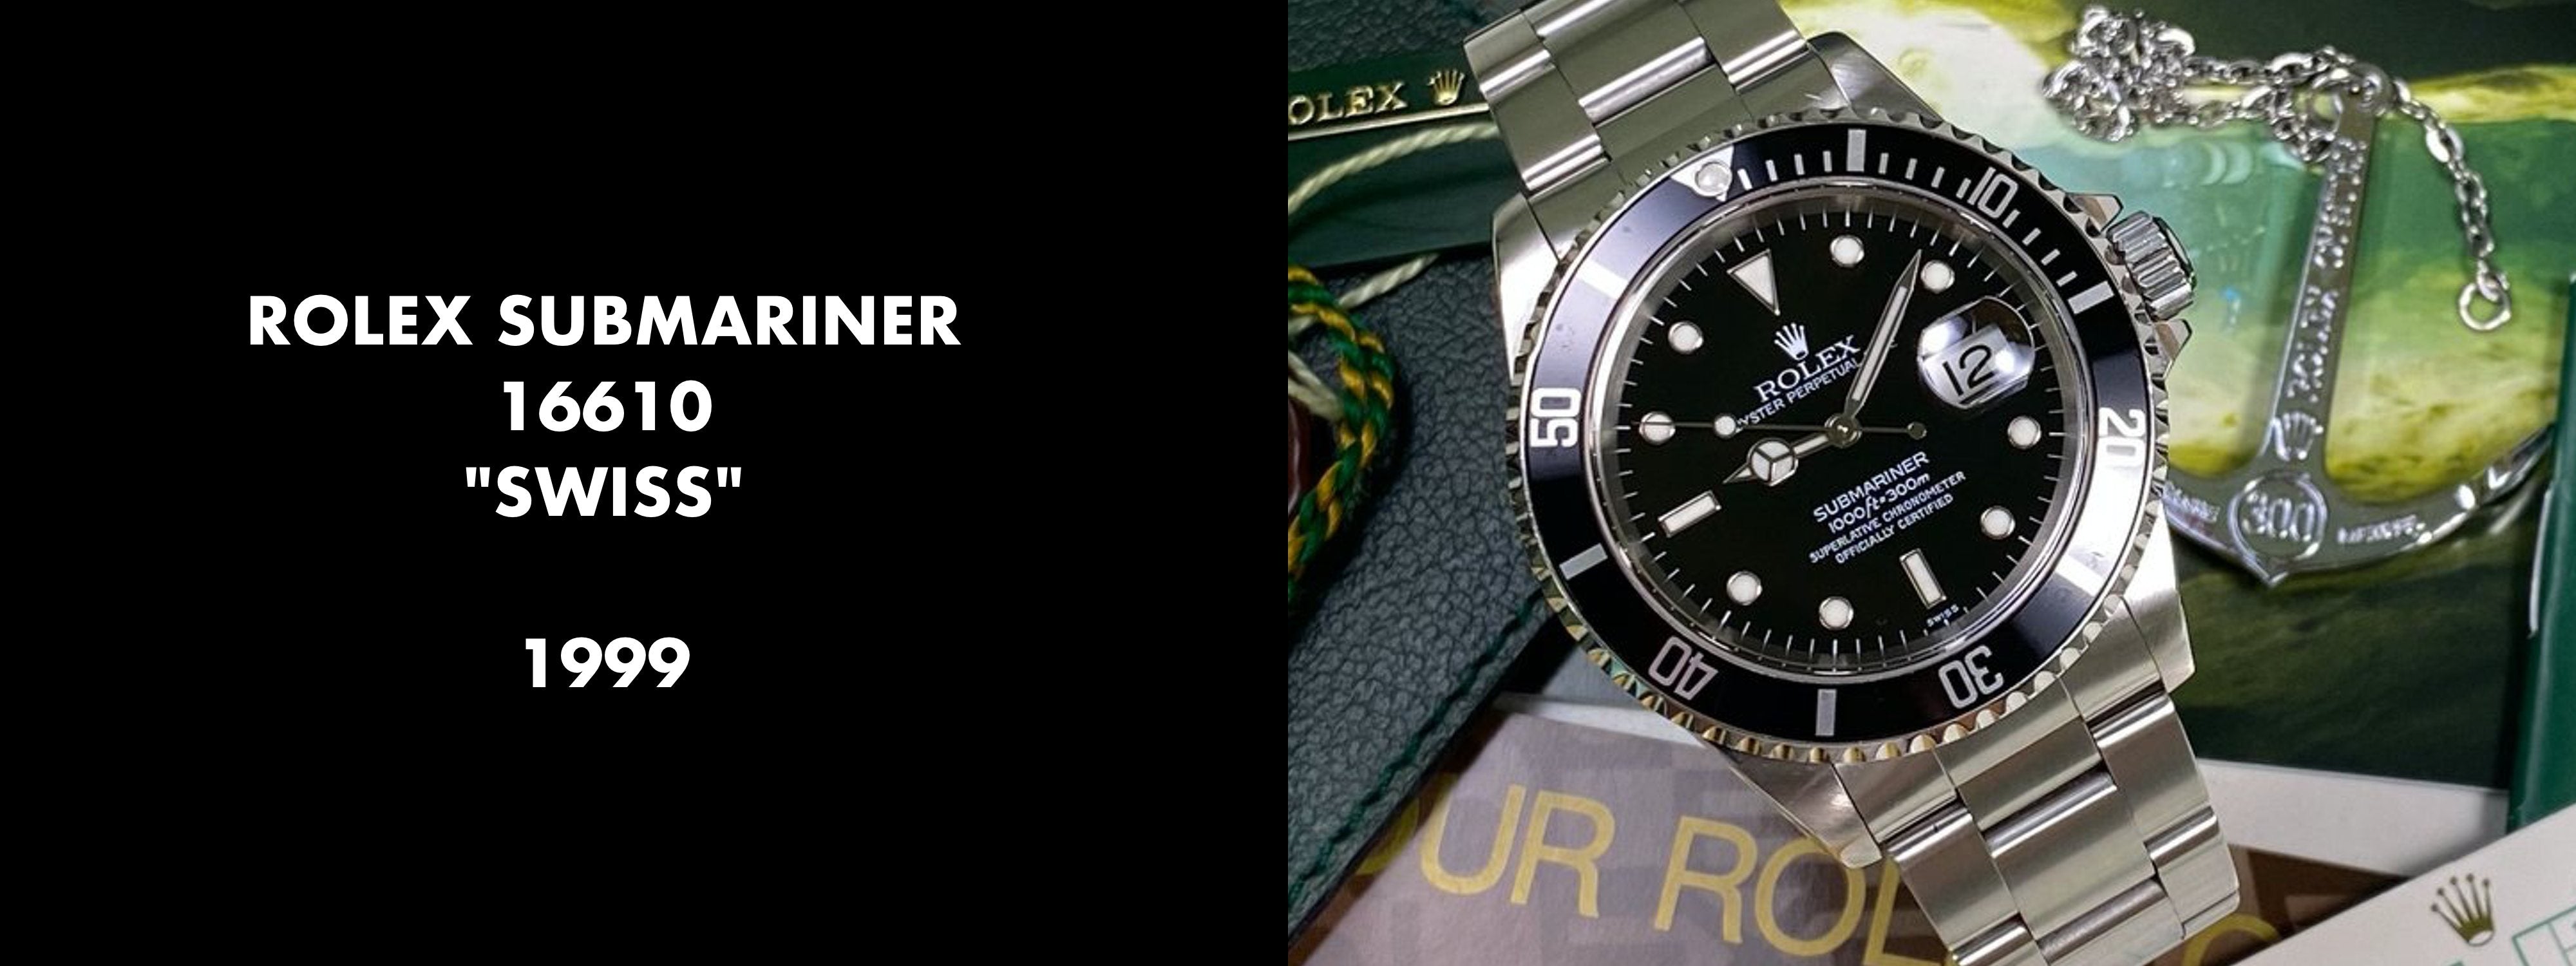 Rolex Submariner 16610 - SWISS only Dial